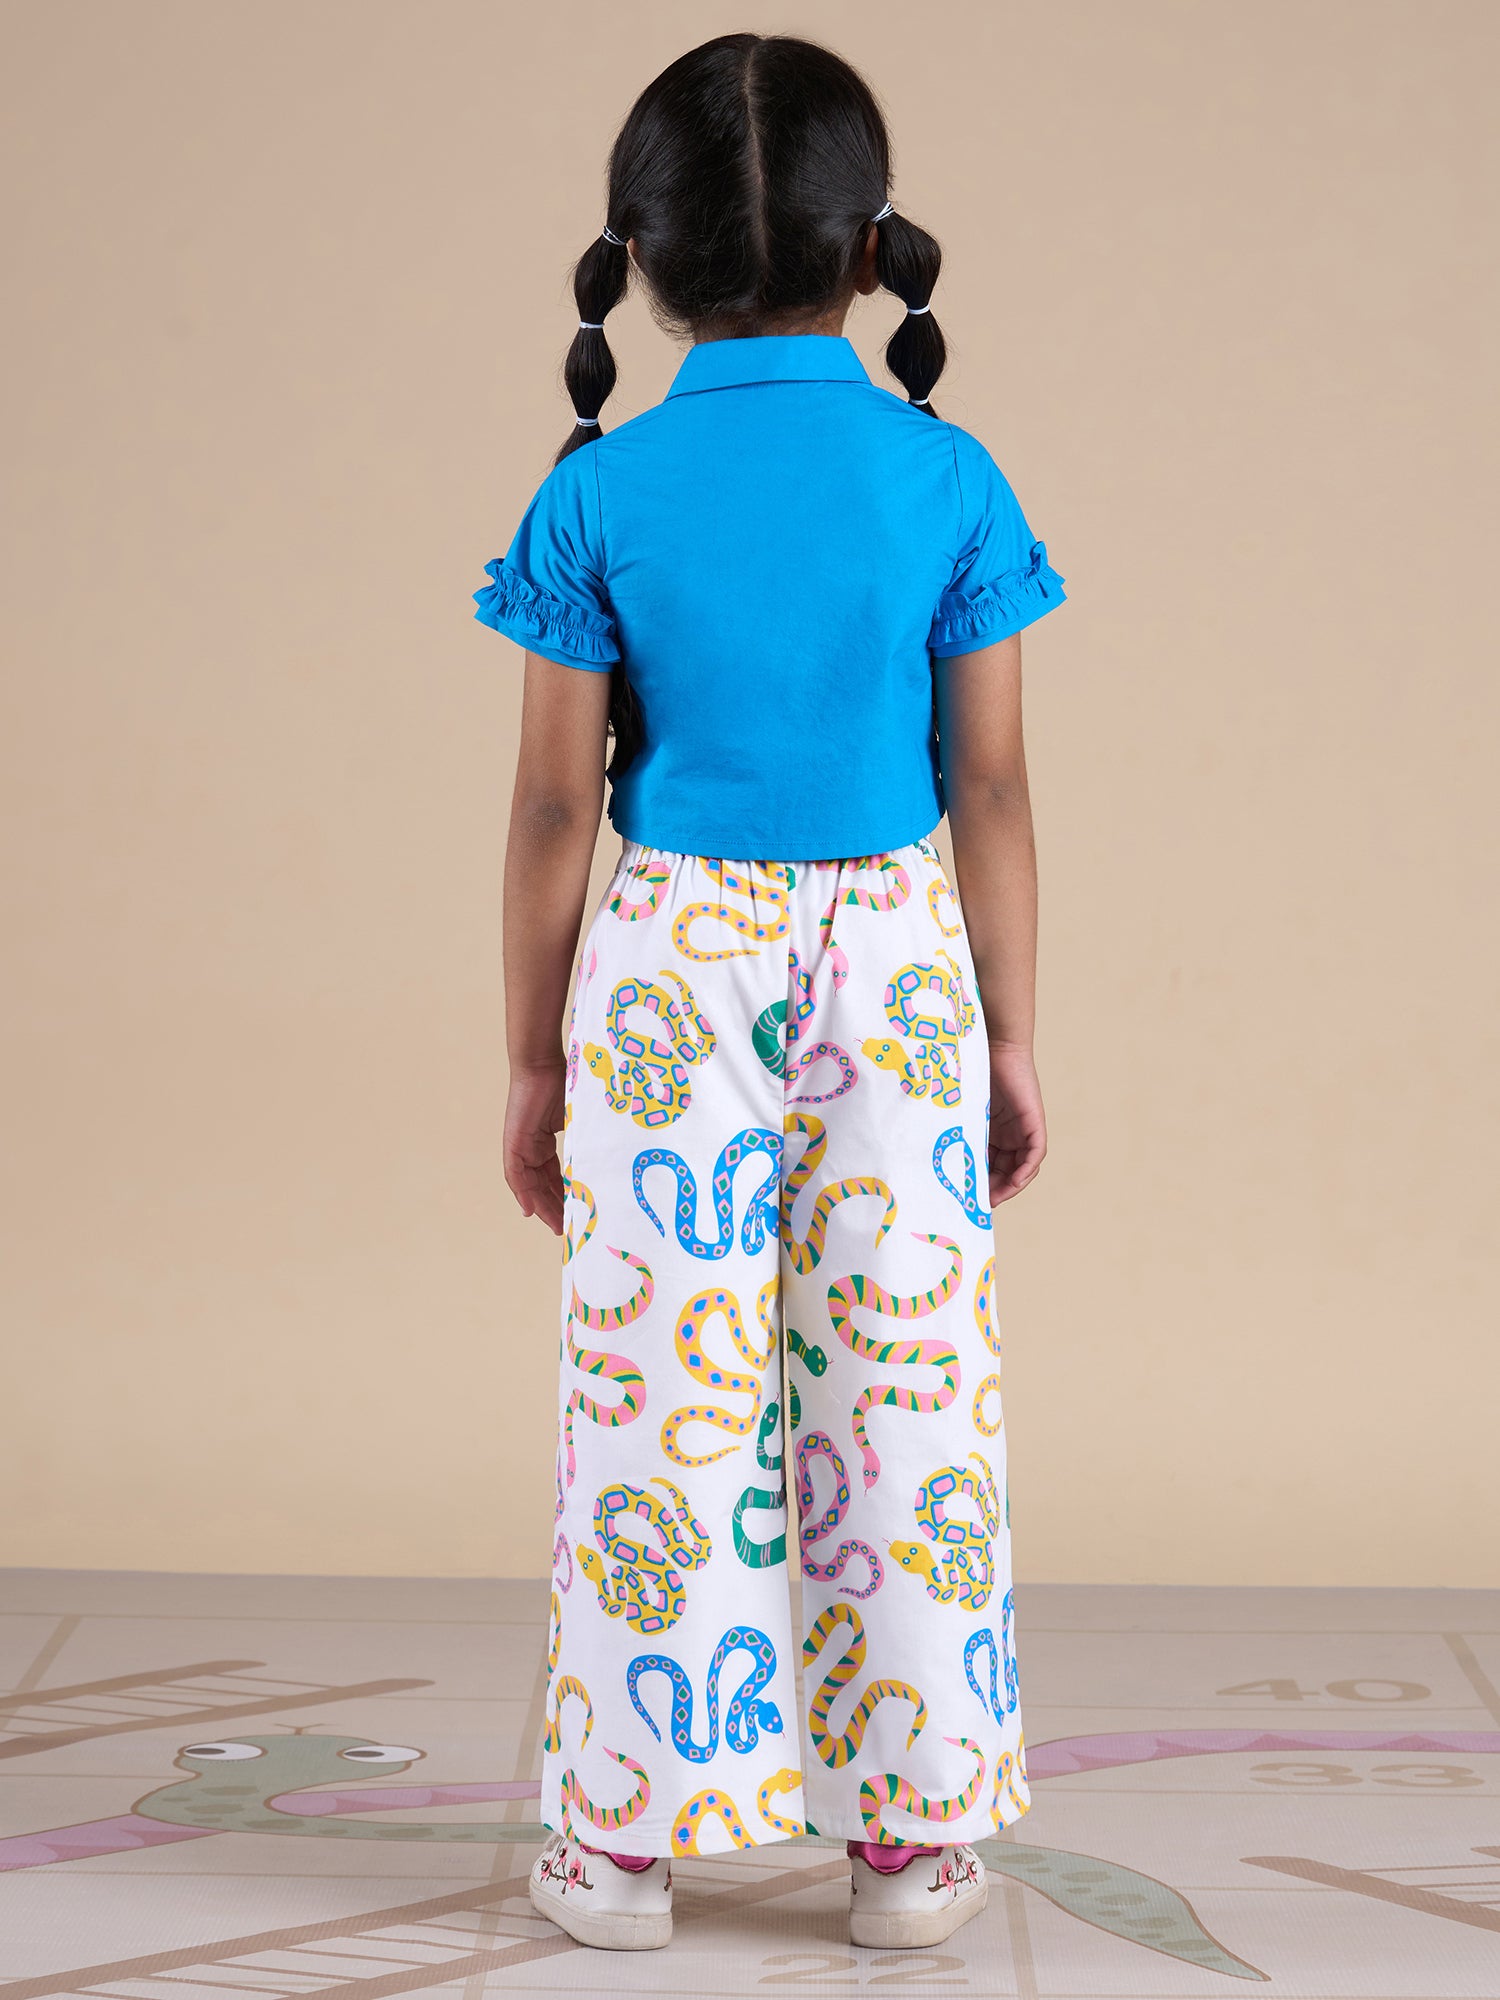 Snakes And Ladders Girls Blue Shirt And Multi Color Snake Print Pant Set From Siblings Collection - Lil Drama